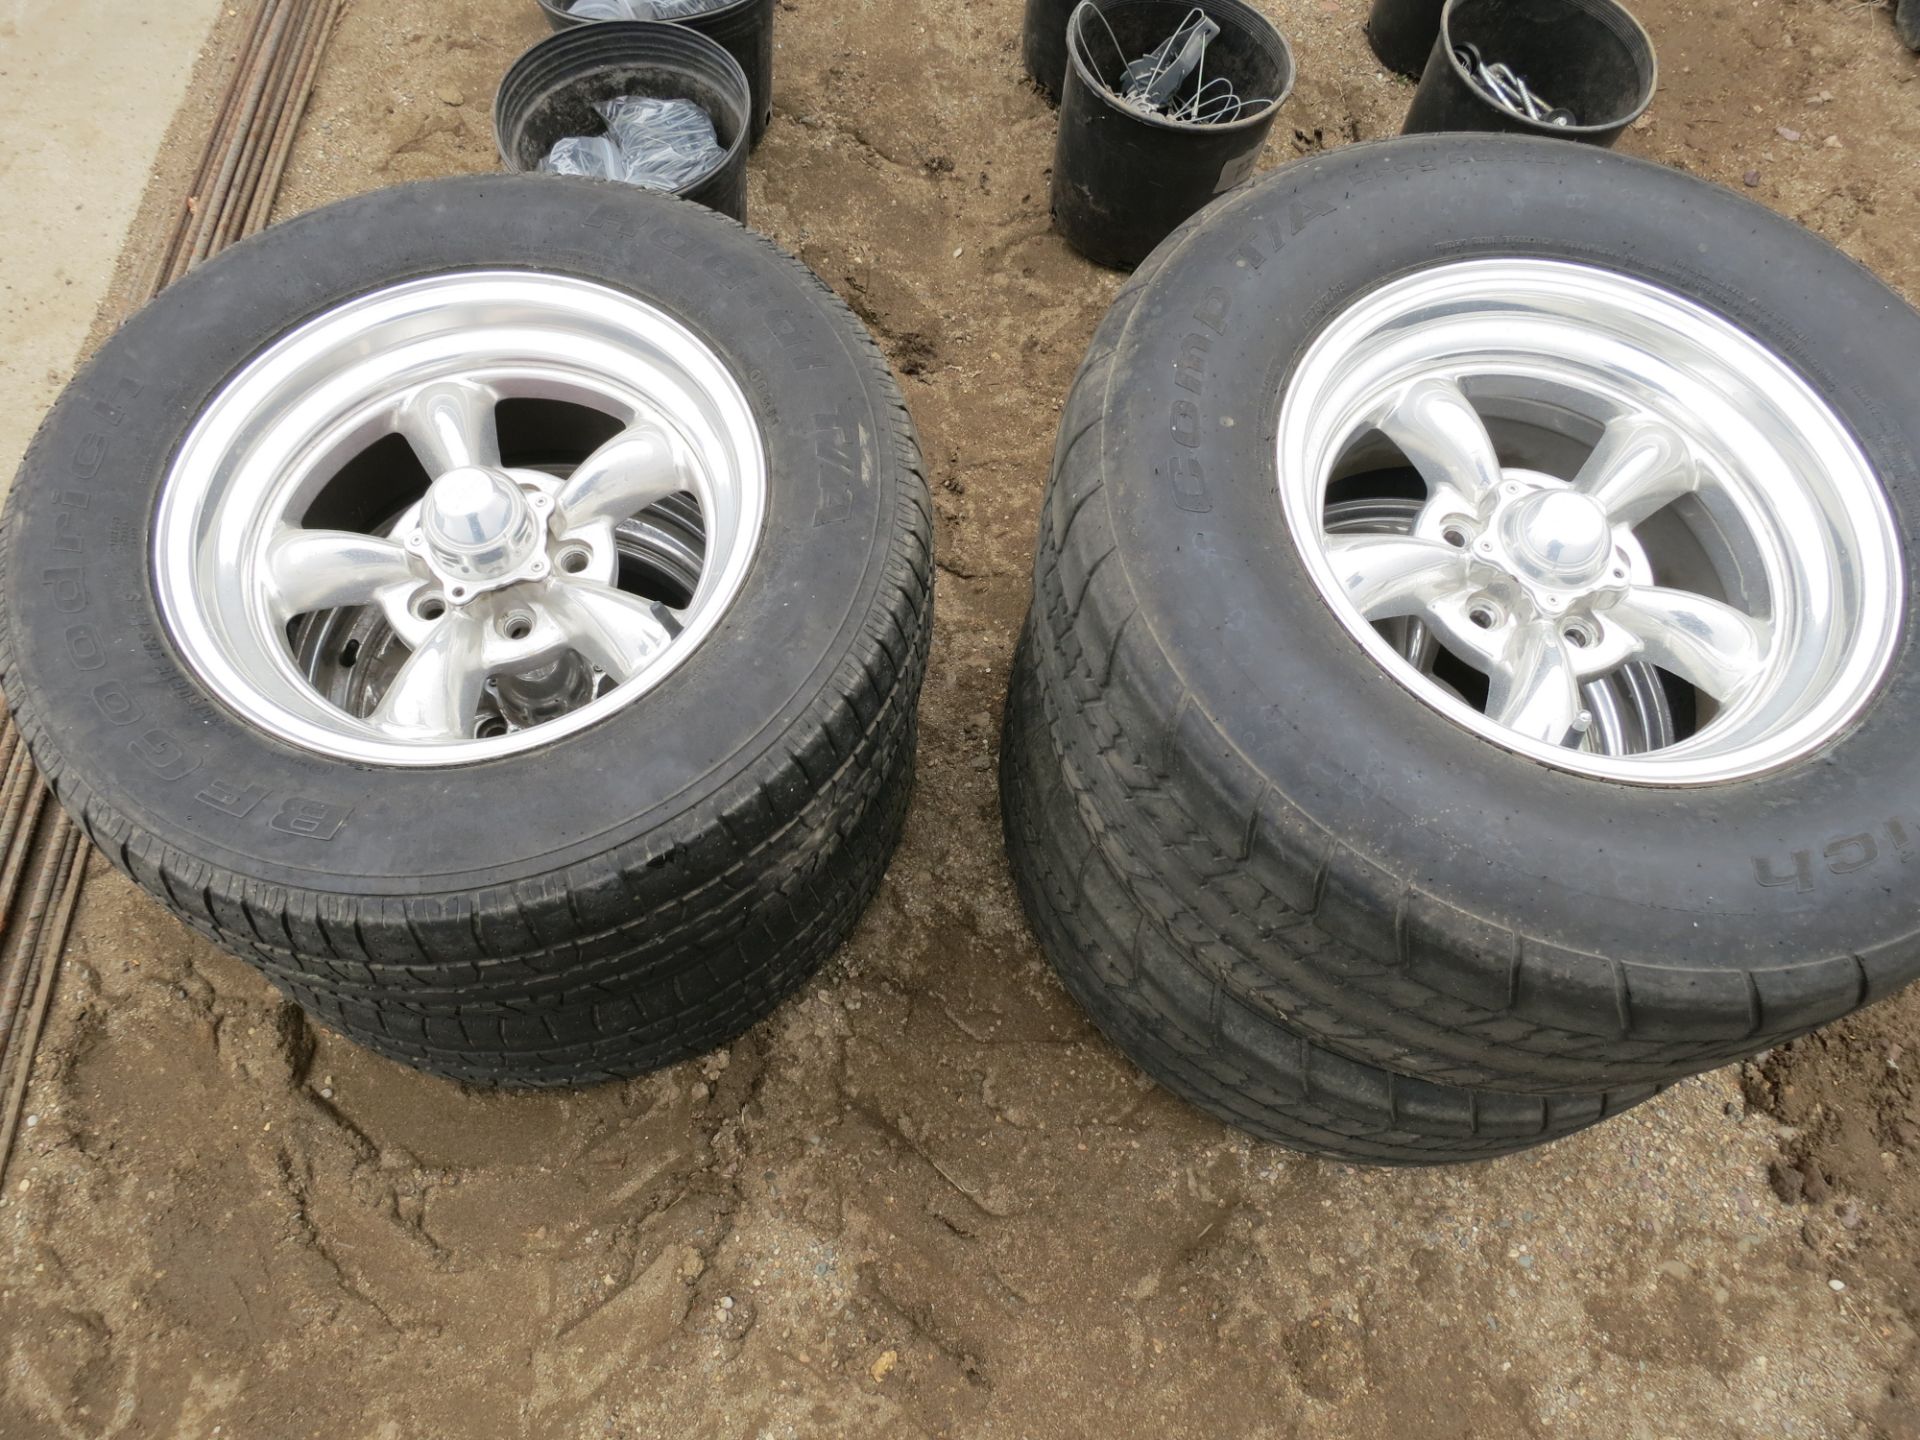 Set of 4 5 bolt rims and tires